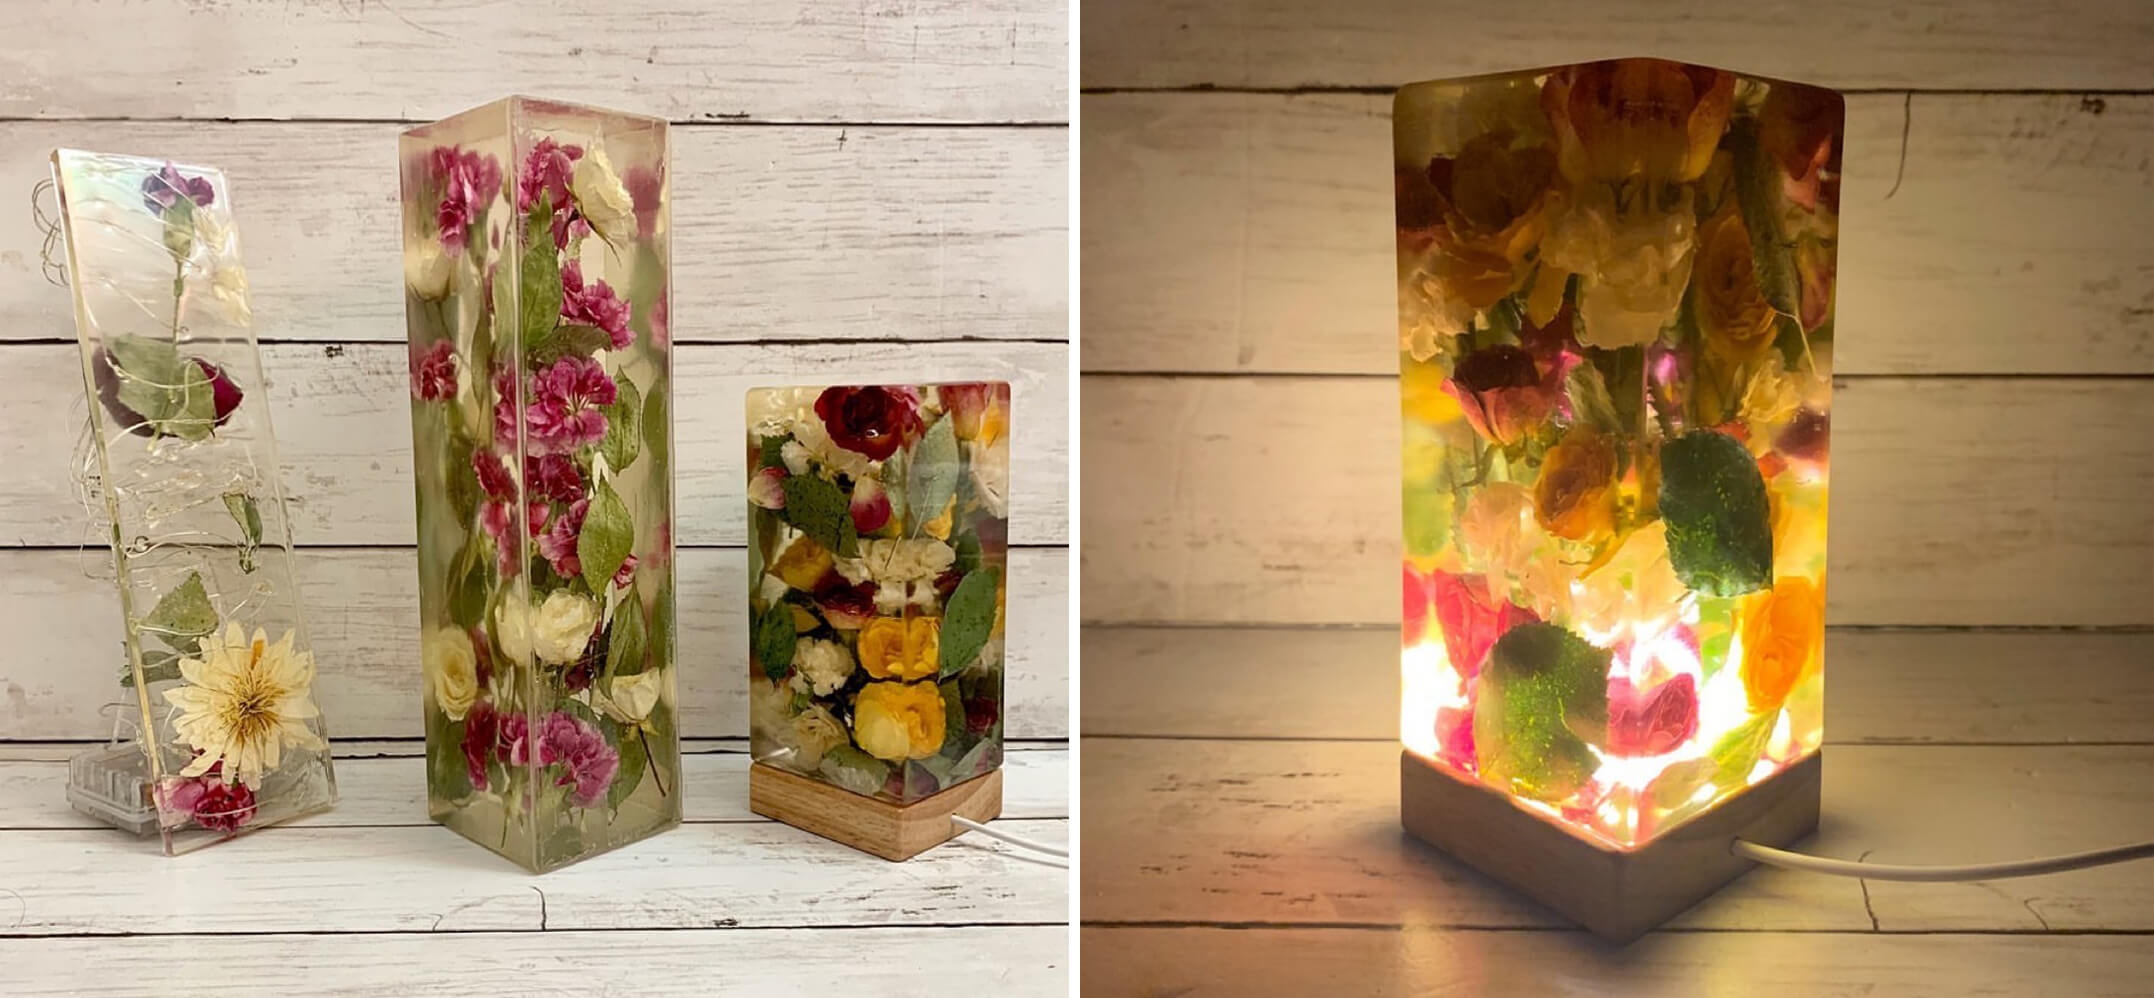 A resin lamp Ella Huang created after the one that inspired her to start using it